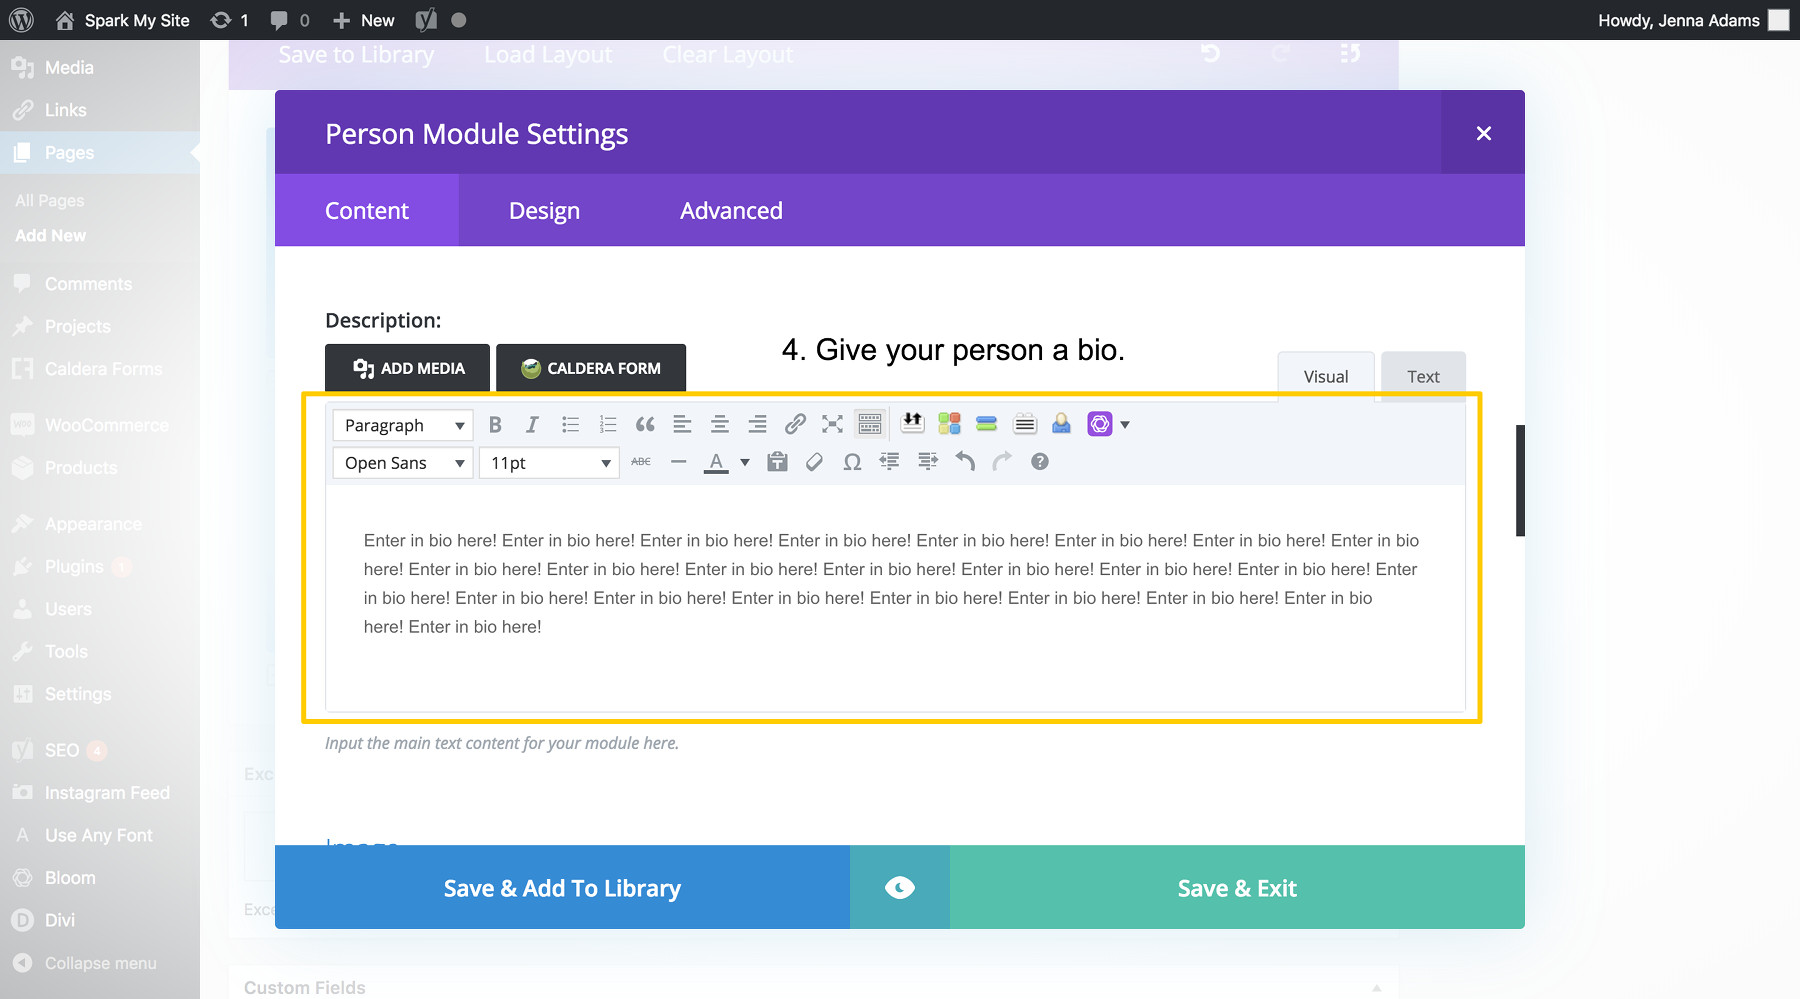 Divi Tutorials: How to Use the Person Module - Spark My Site